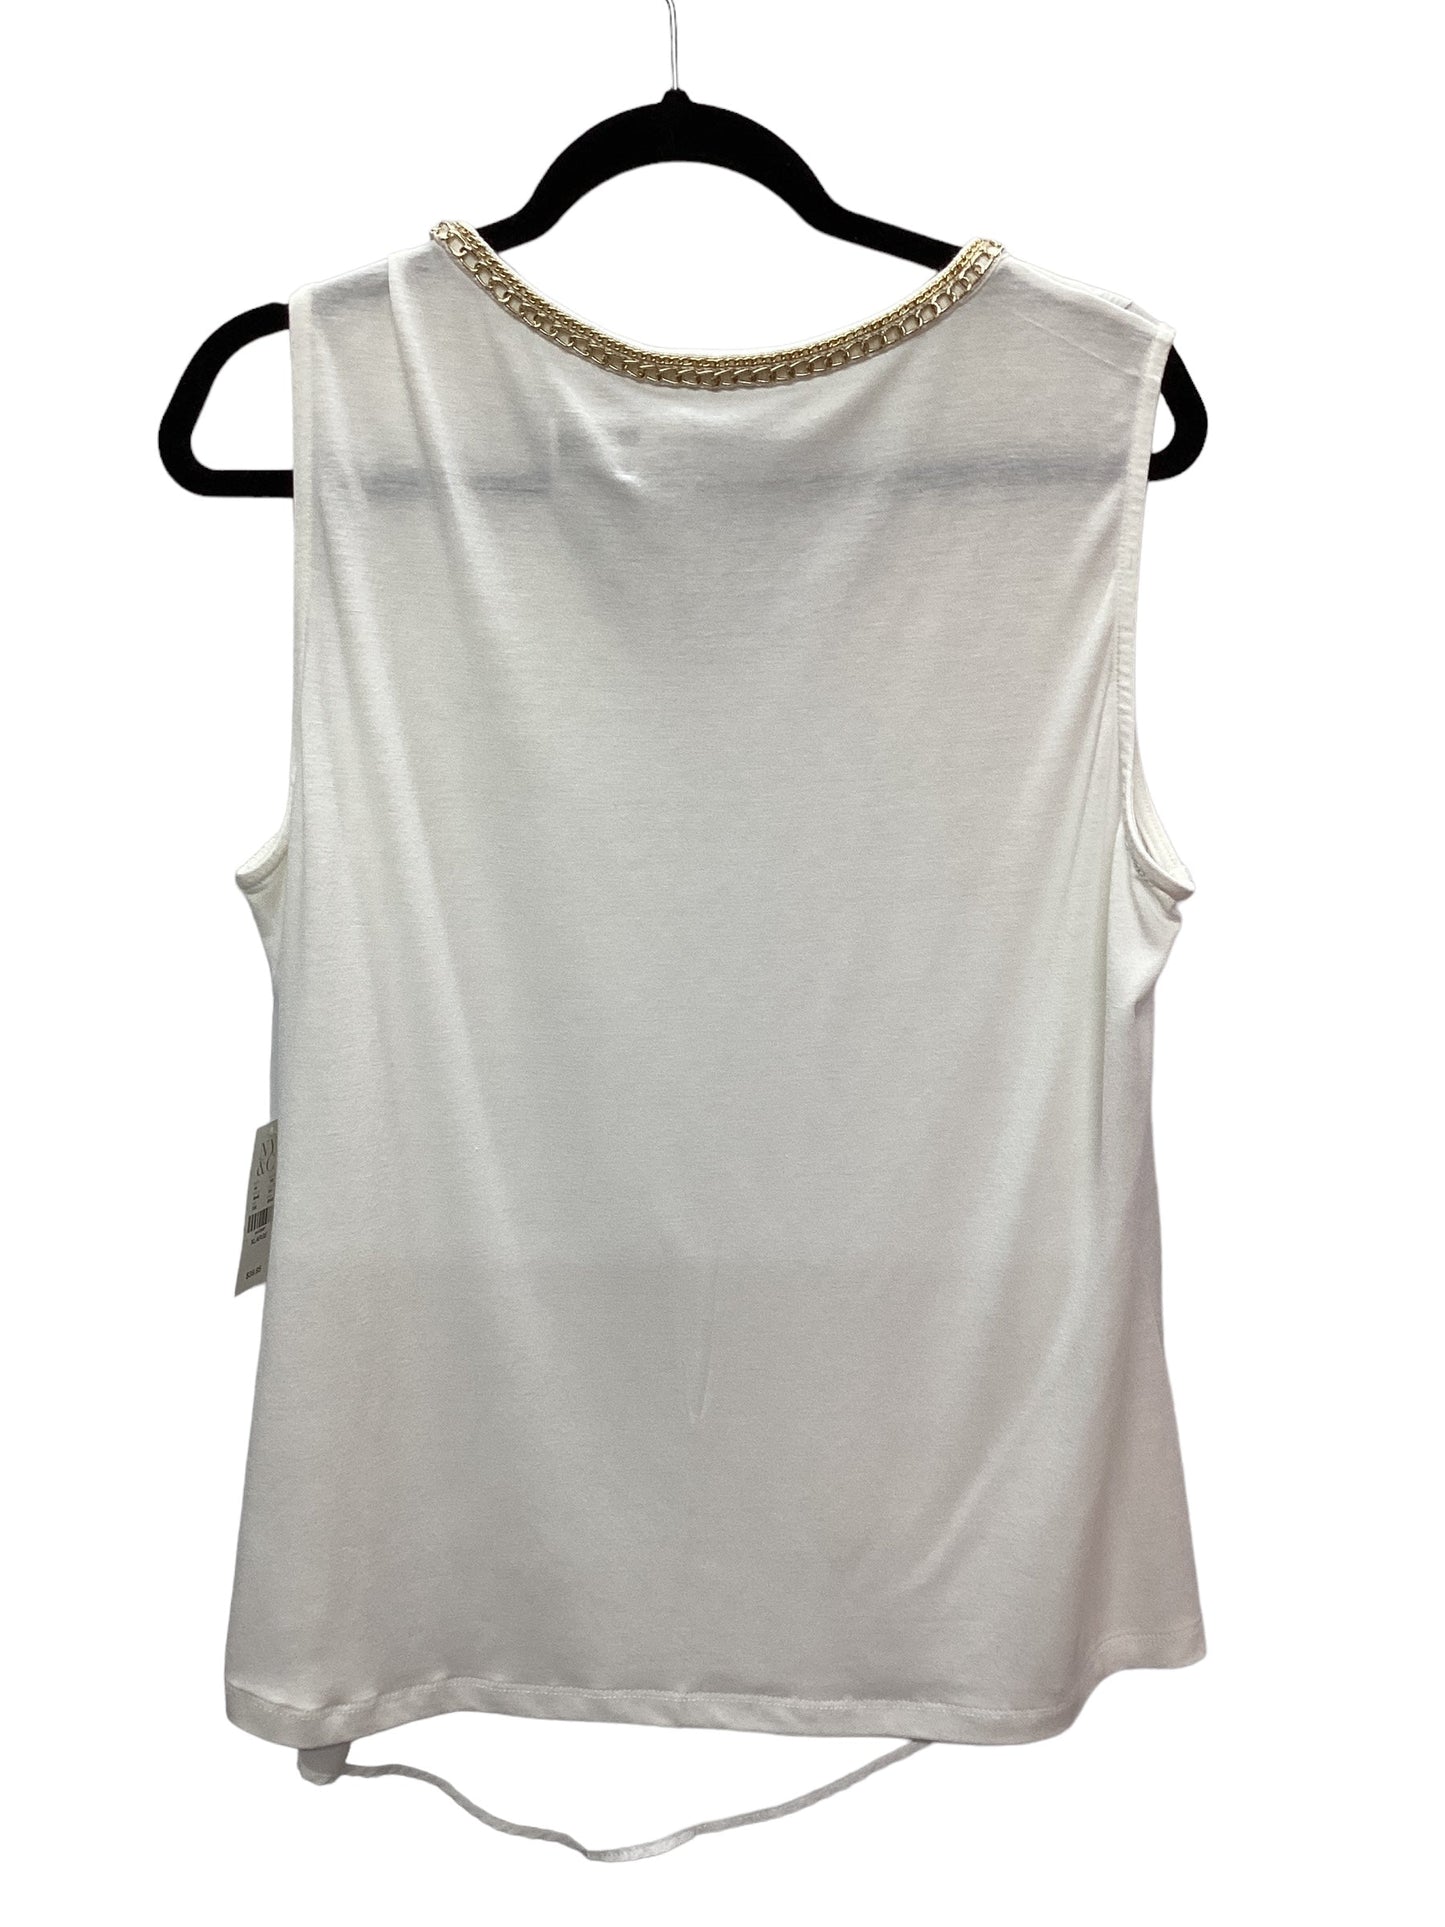 Cream Top Sleeveless New York And Co, Size Xl